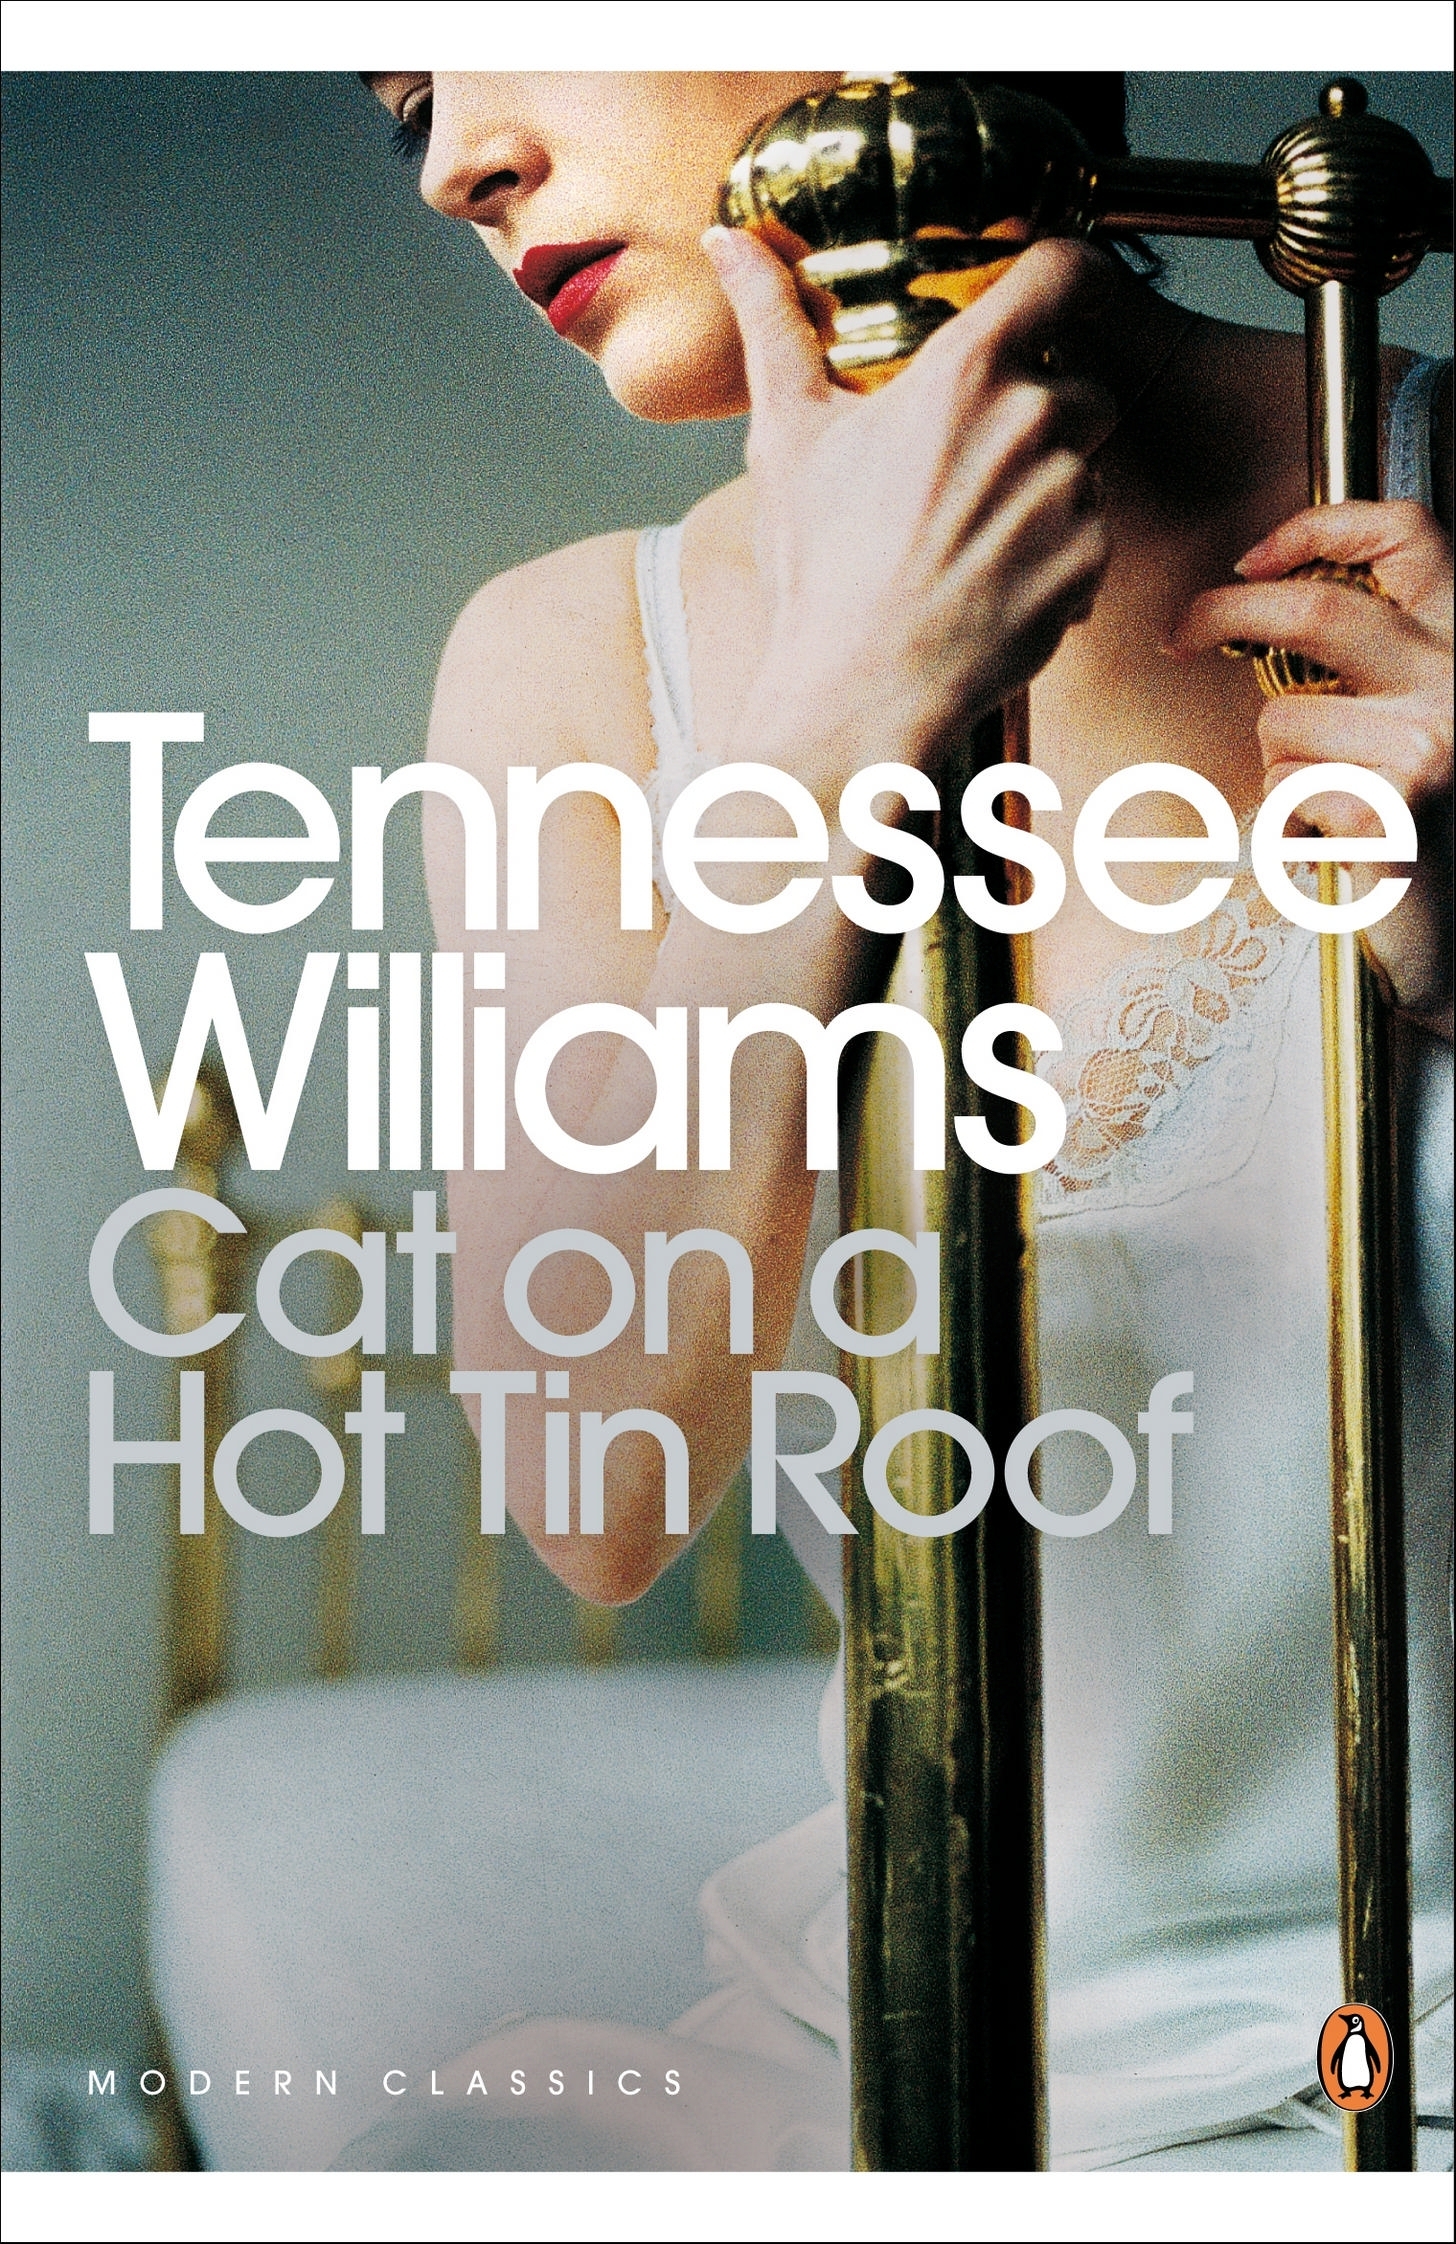 Cat on a Hot Tin Roof by Tennessee Williams - Penguin Books New Zealand